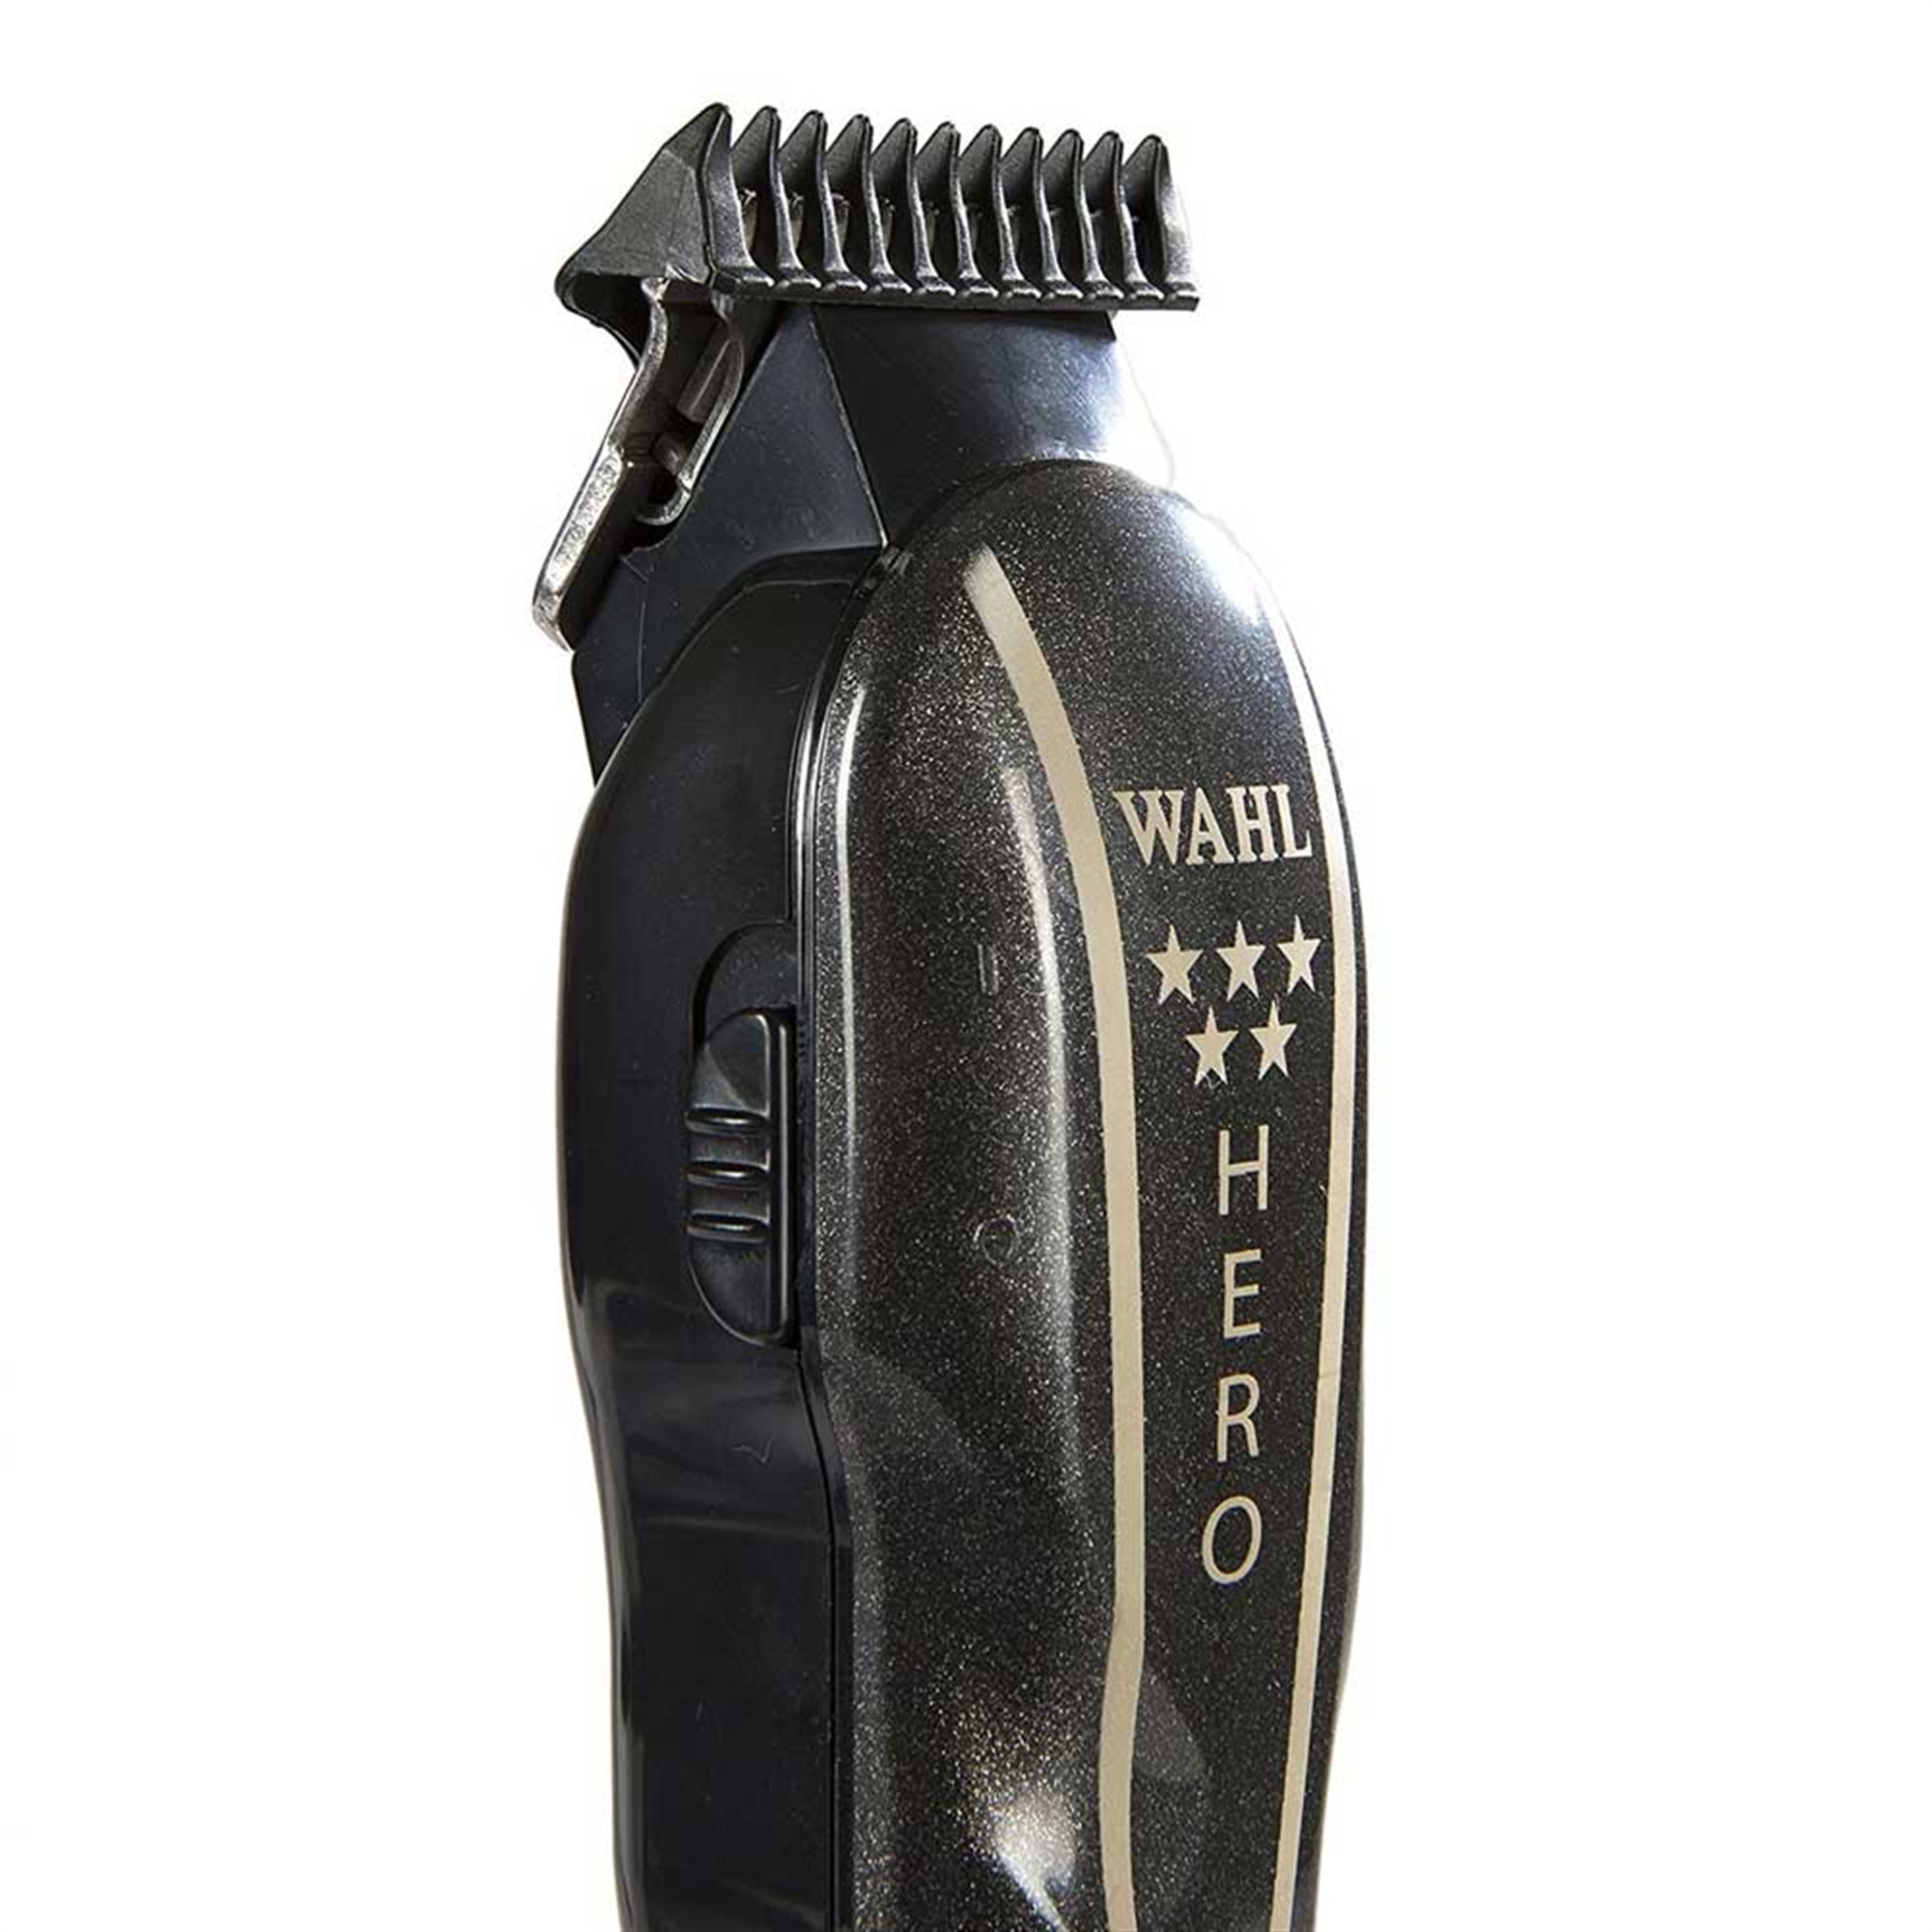 Wahl Professional Trimmer HERO & Hair Clipper LEGEND 5 Star Barber Combo 8180 with Babyliss Pro Barberology Industrial Barber Ap